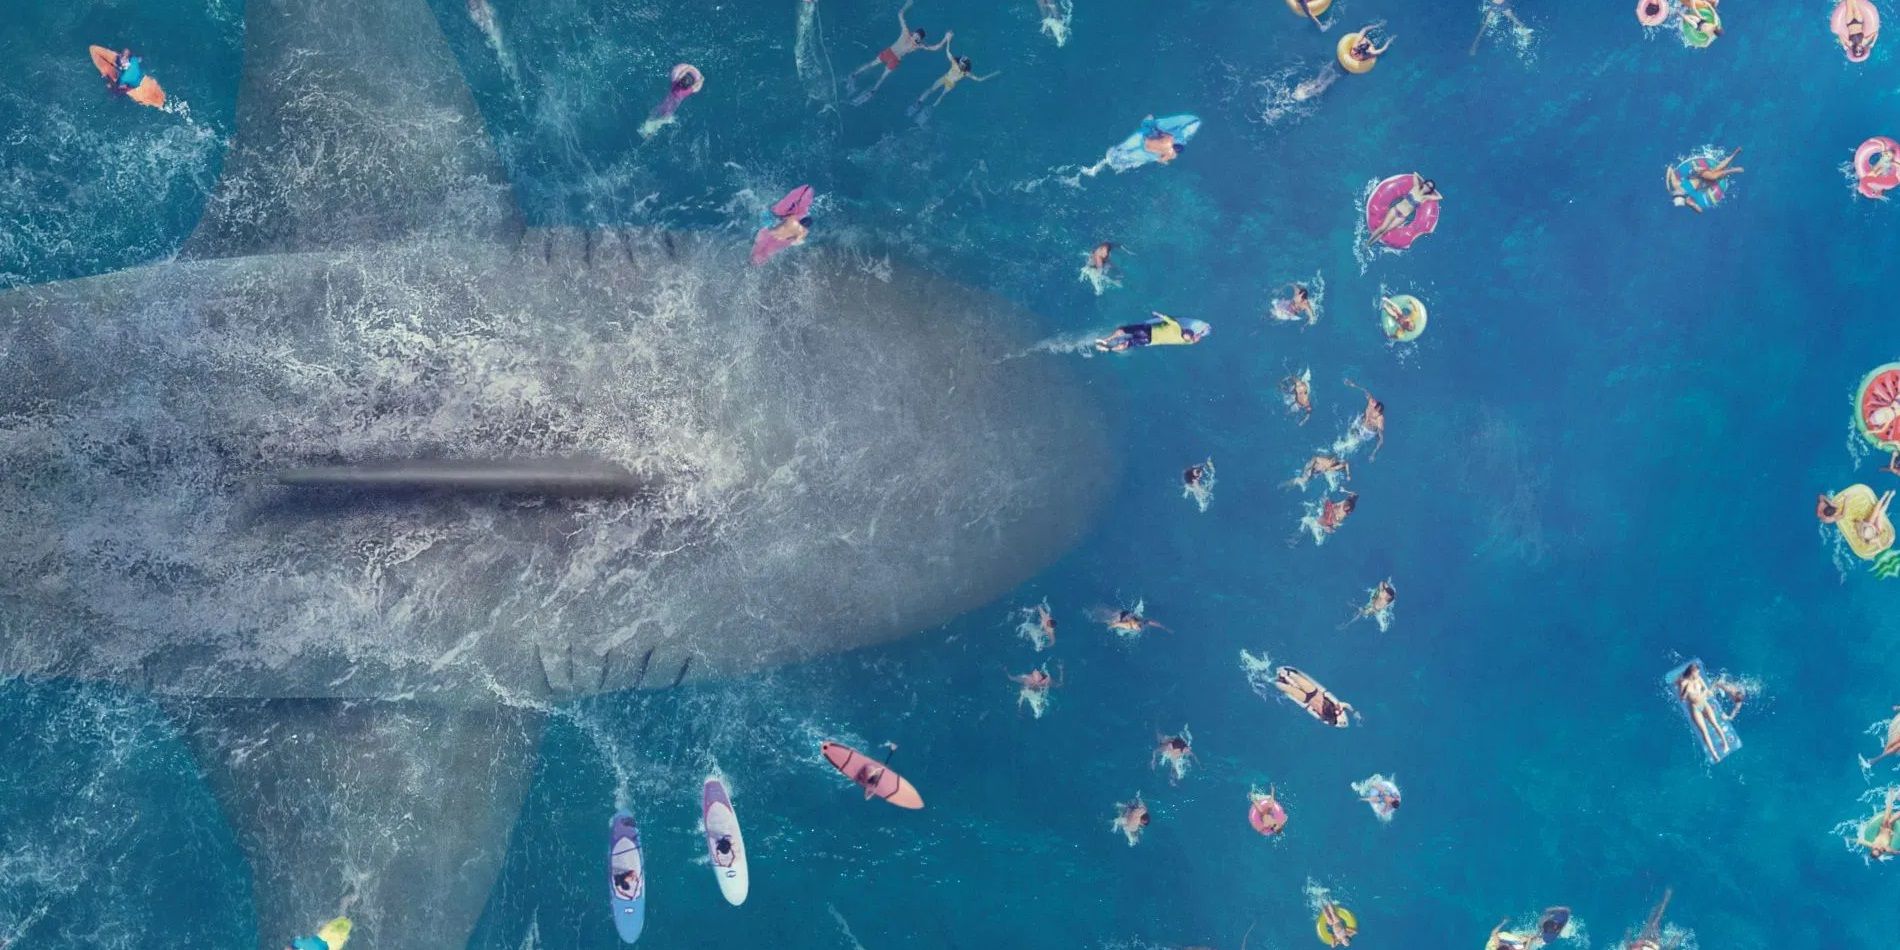 The beach attack in The Meg